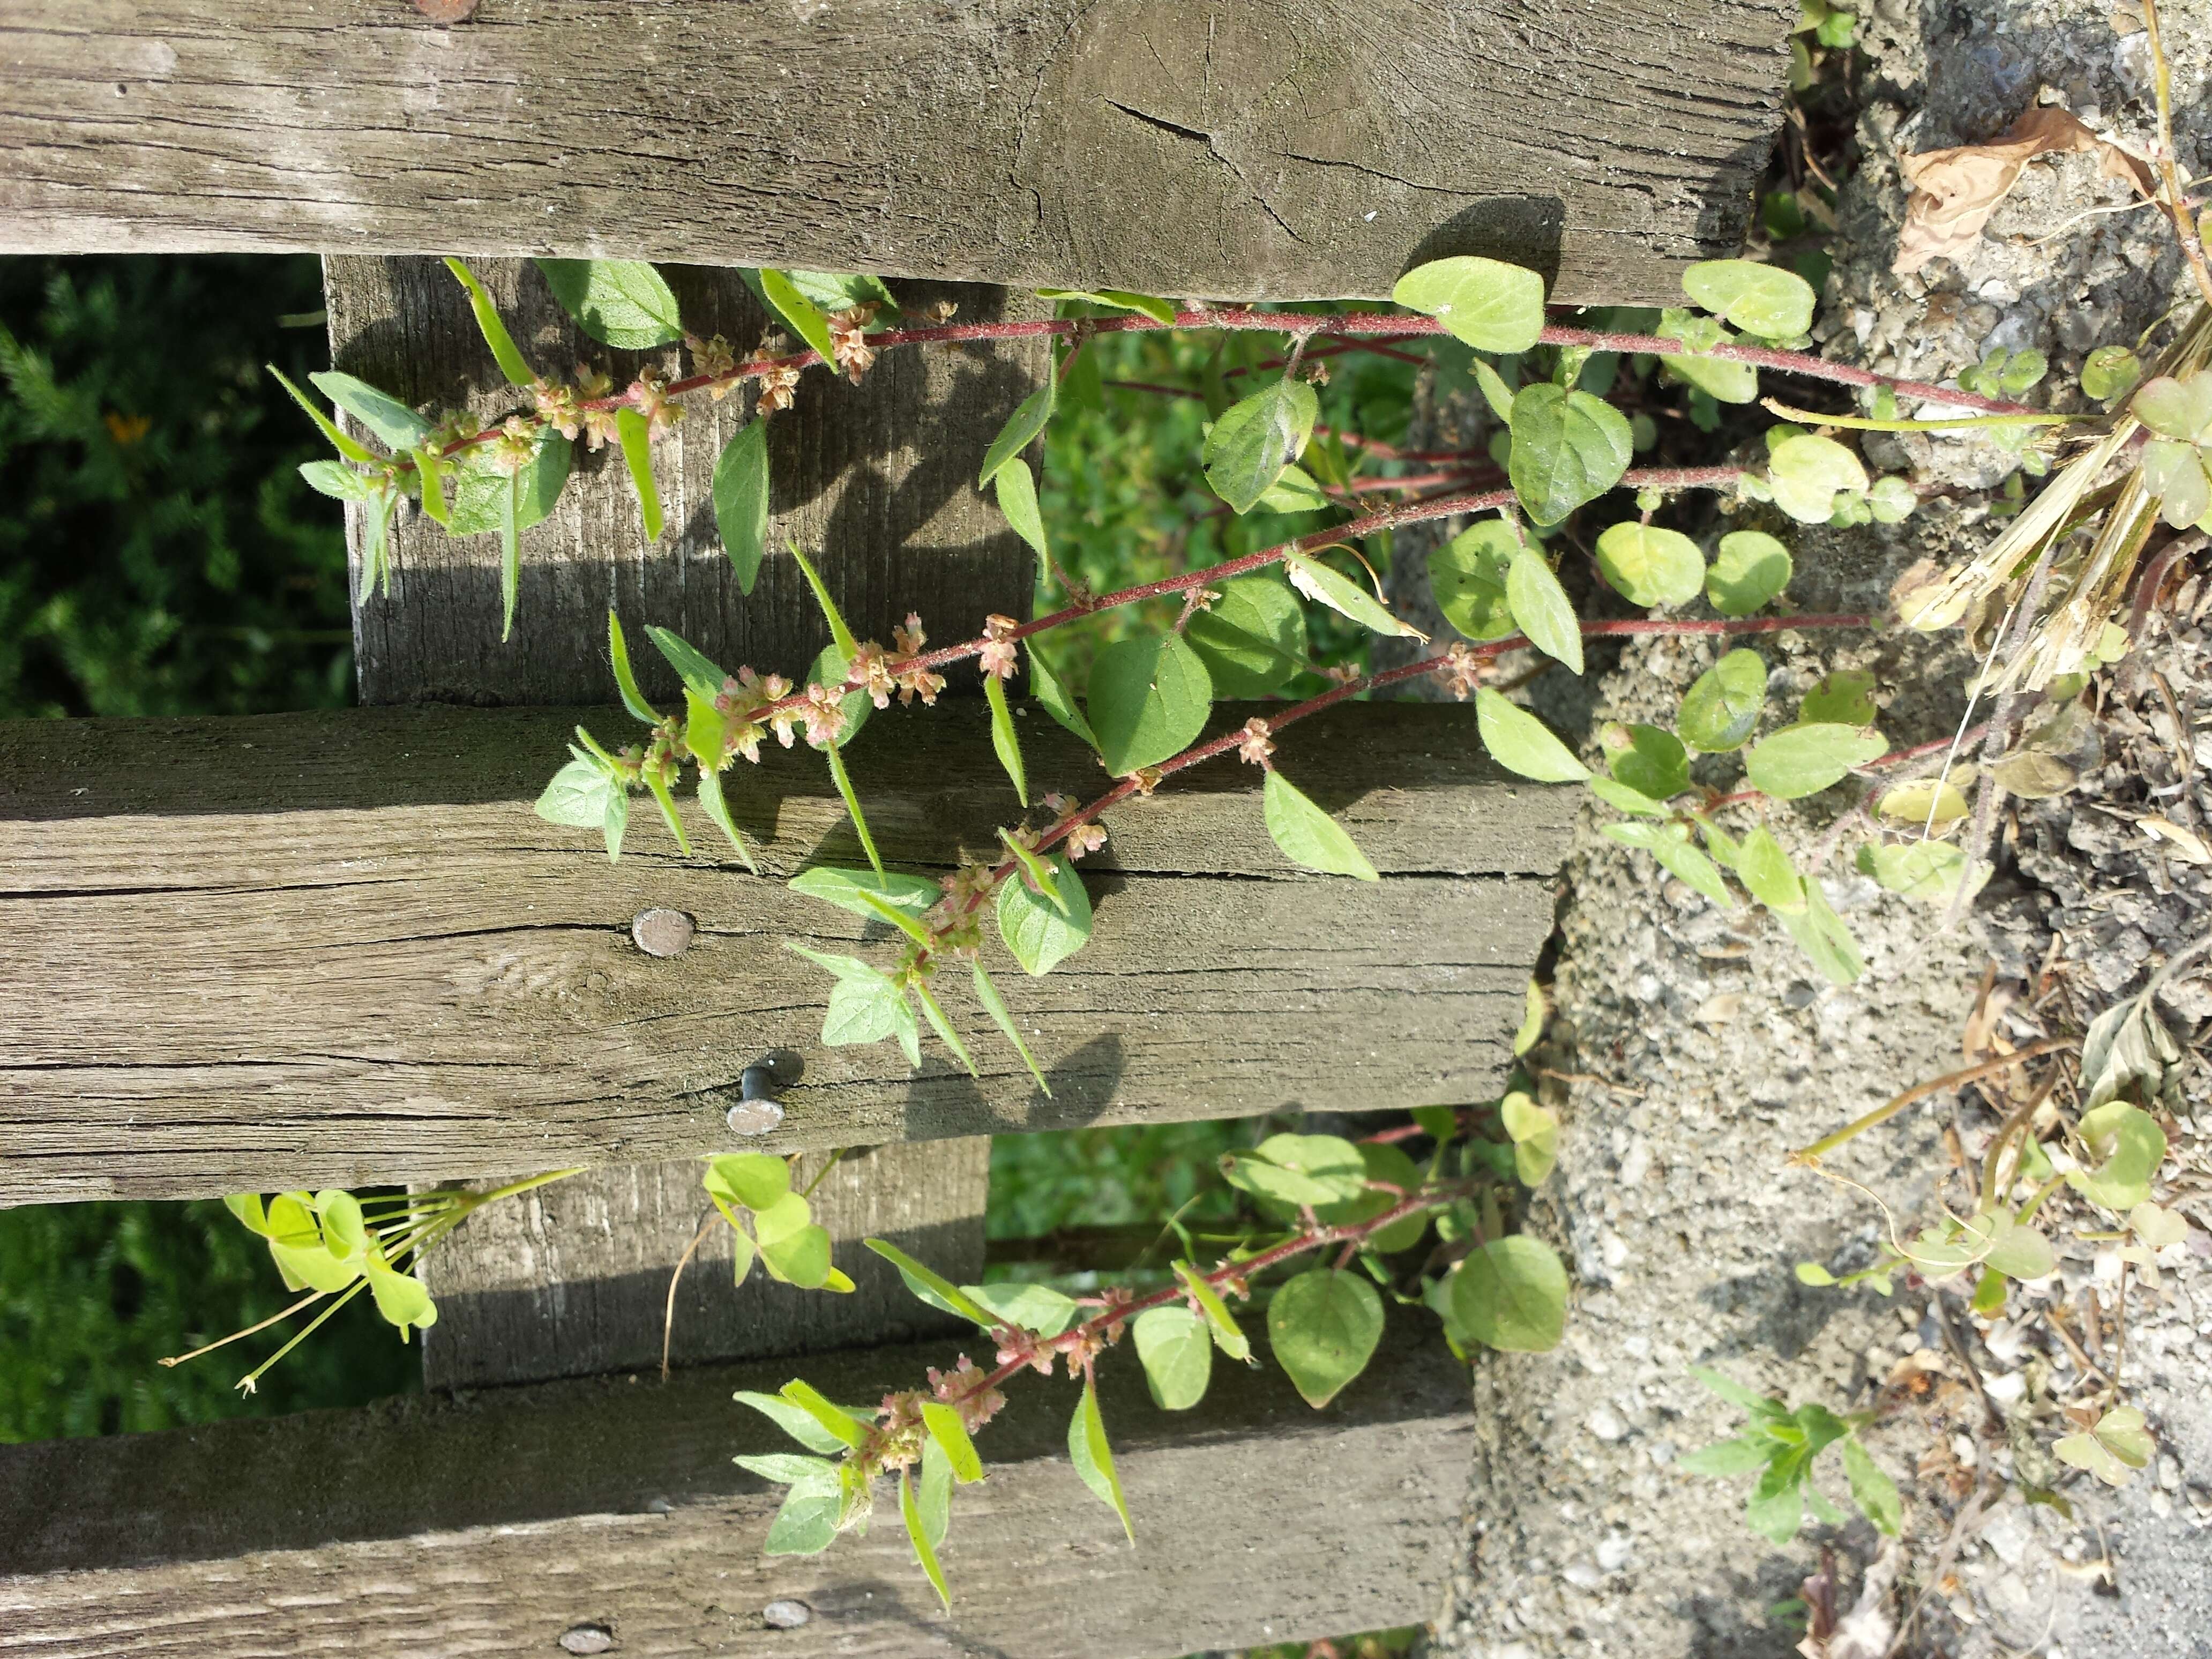 Image of pellitory-of-the-wall